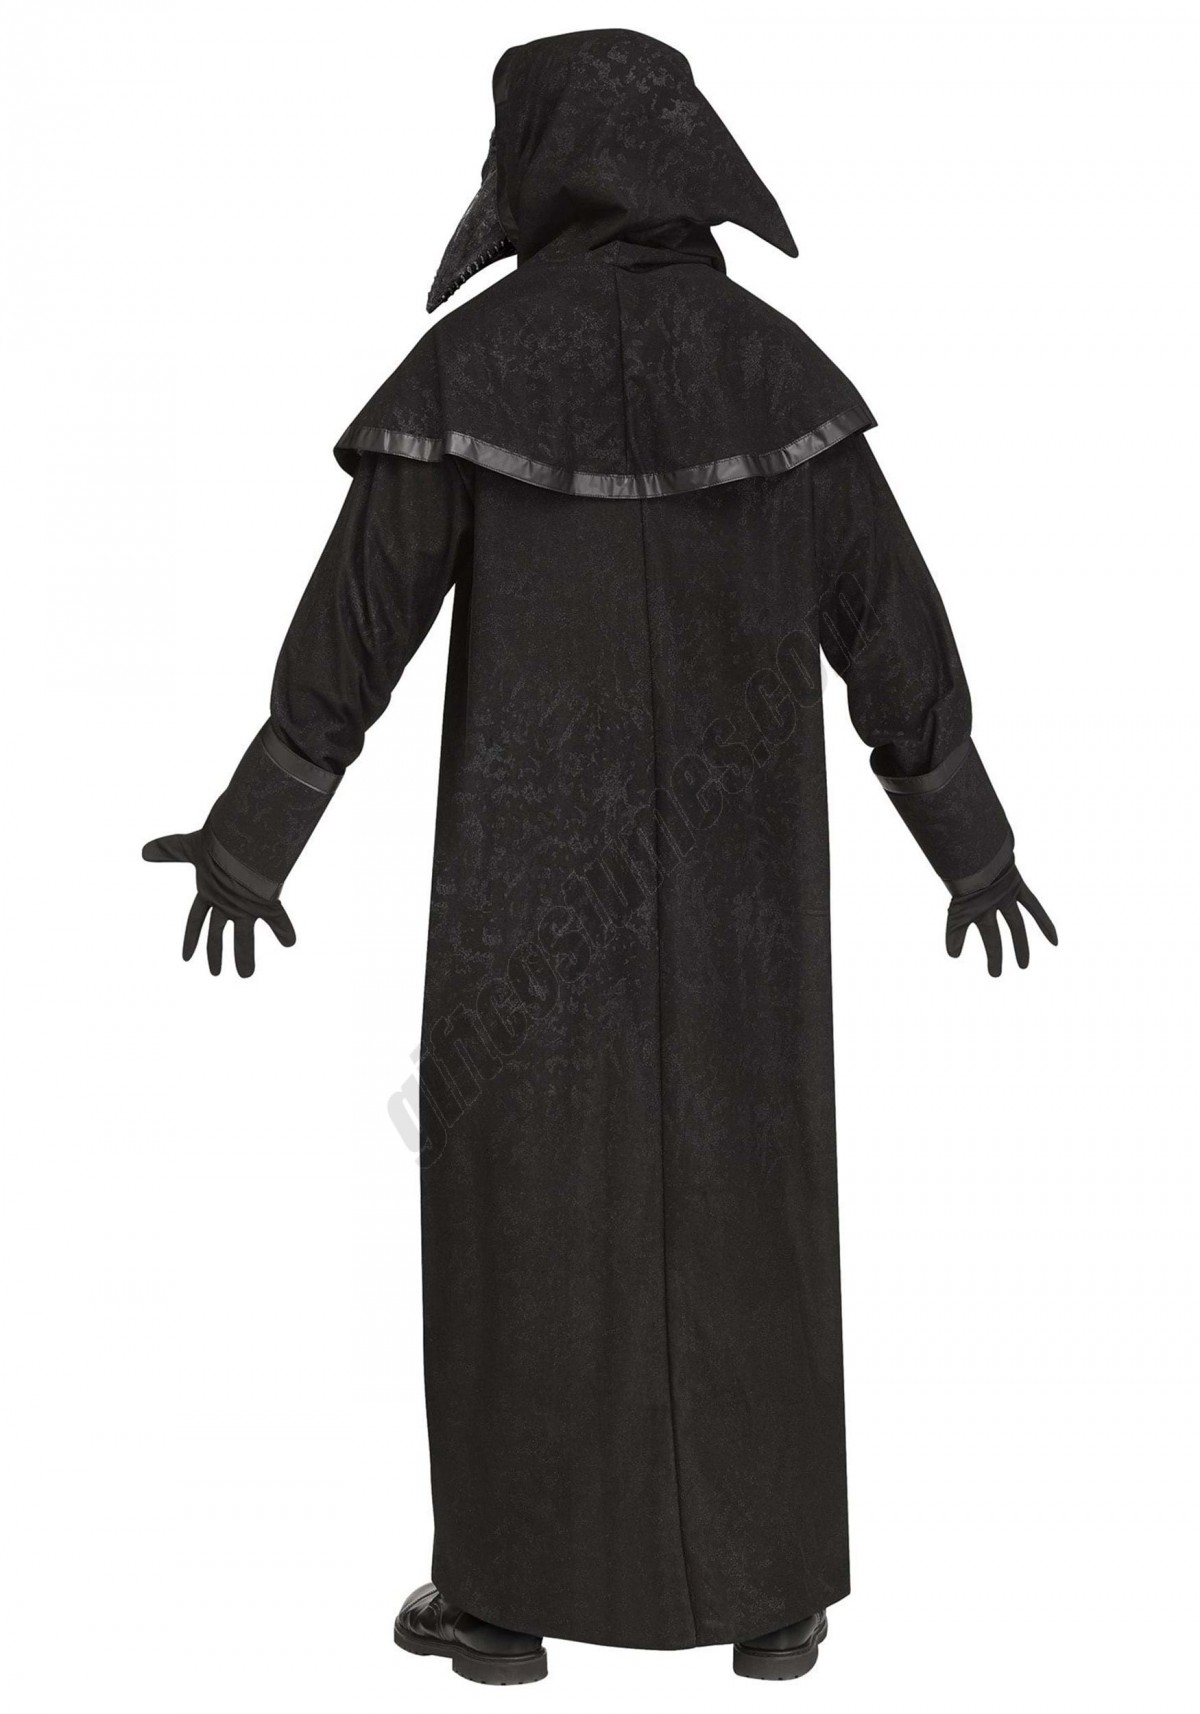 Black Plague Doctor Costume for Adults - Women's - -1